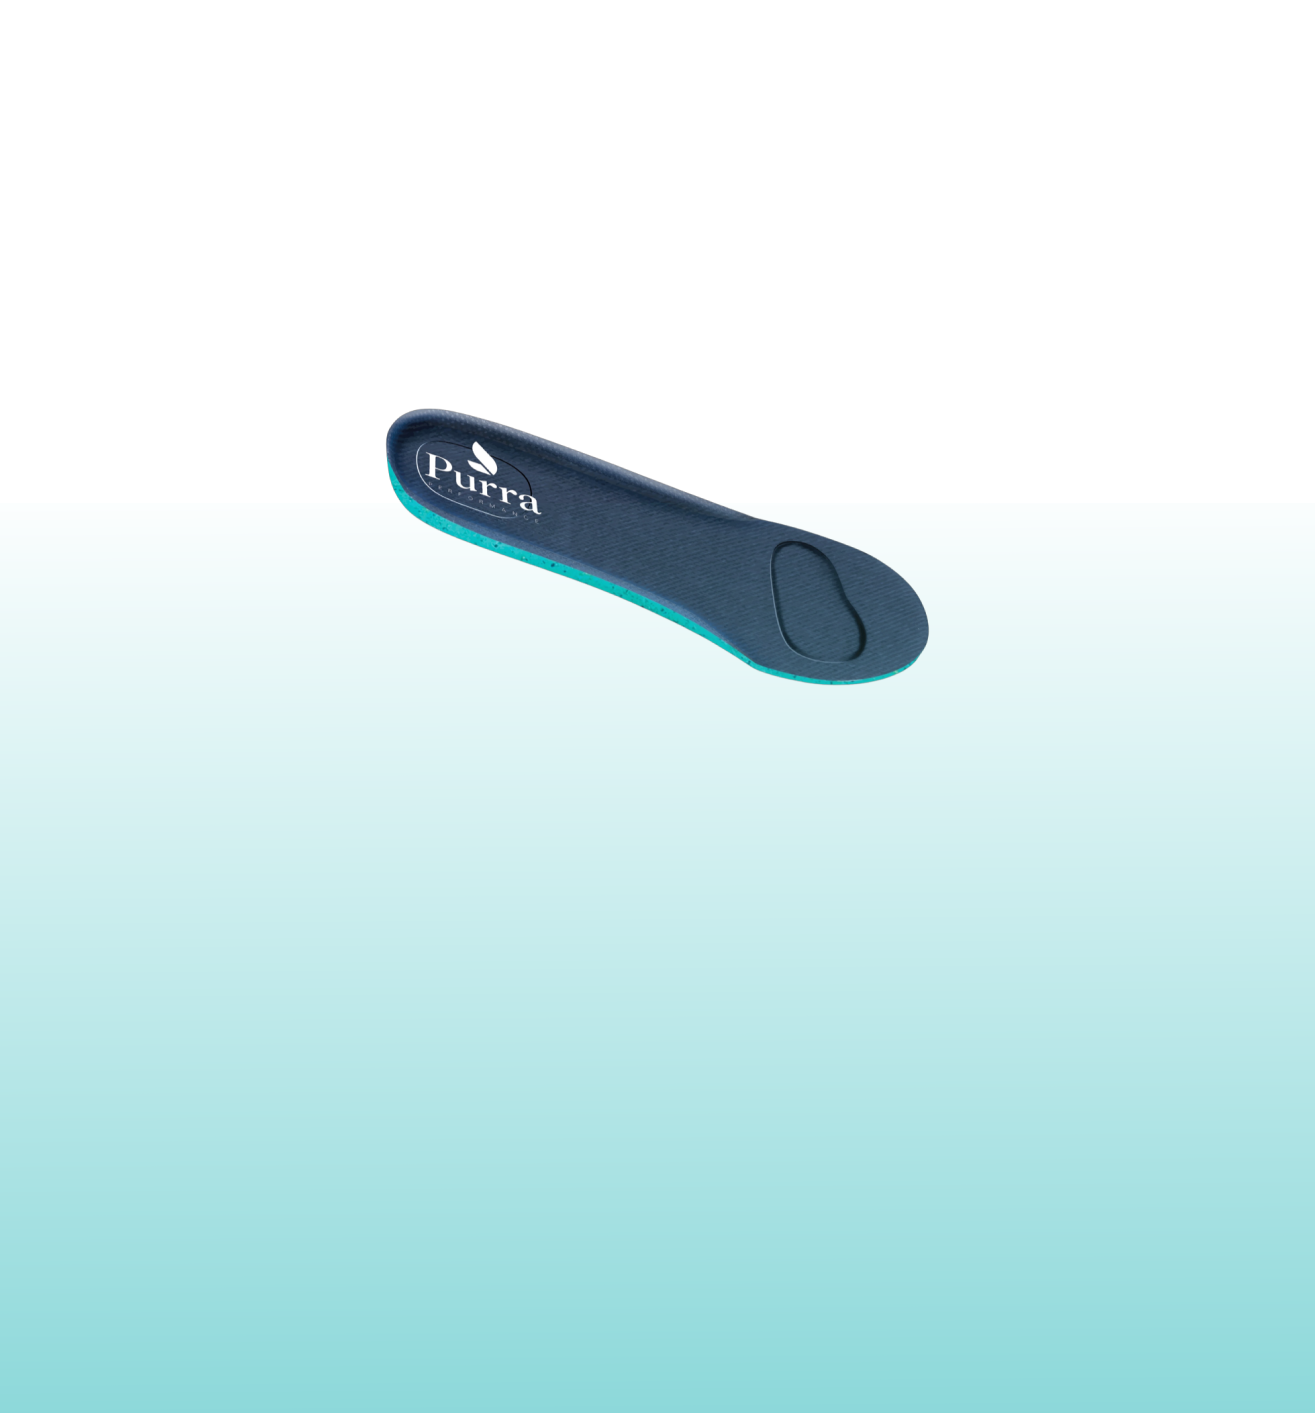 A single memory foam insole with a navy blue upper and teal colored bottom shown on a pale teal background.  The Purra logo is show on the heel area of the insole